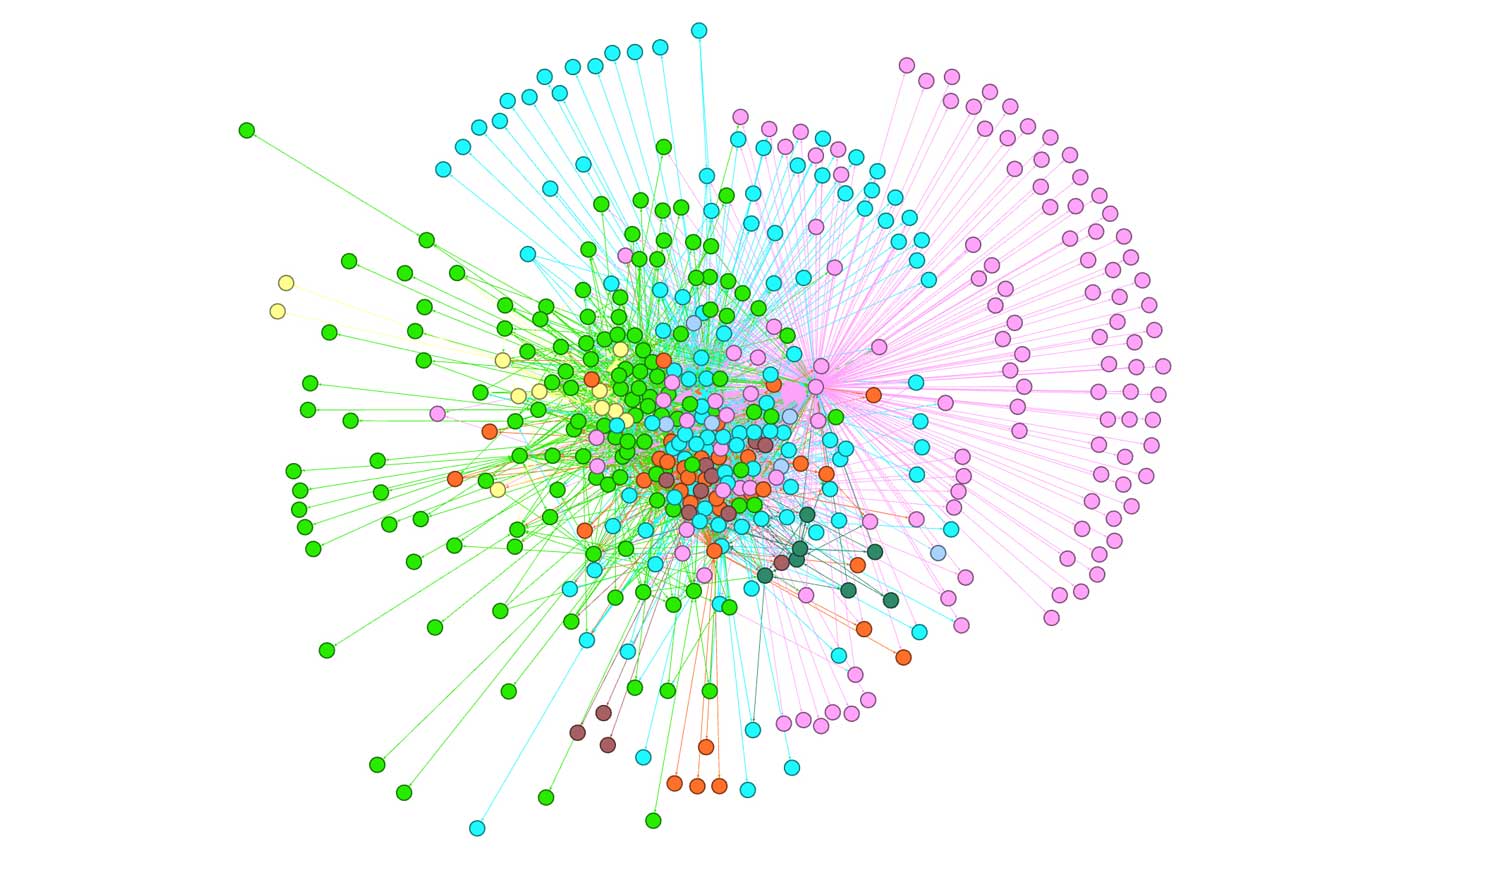 Colored nodes indicate each detected subgroup within the Conti organization